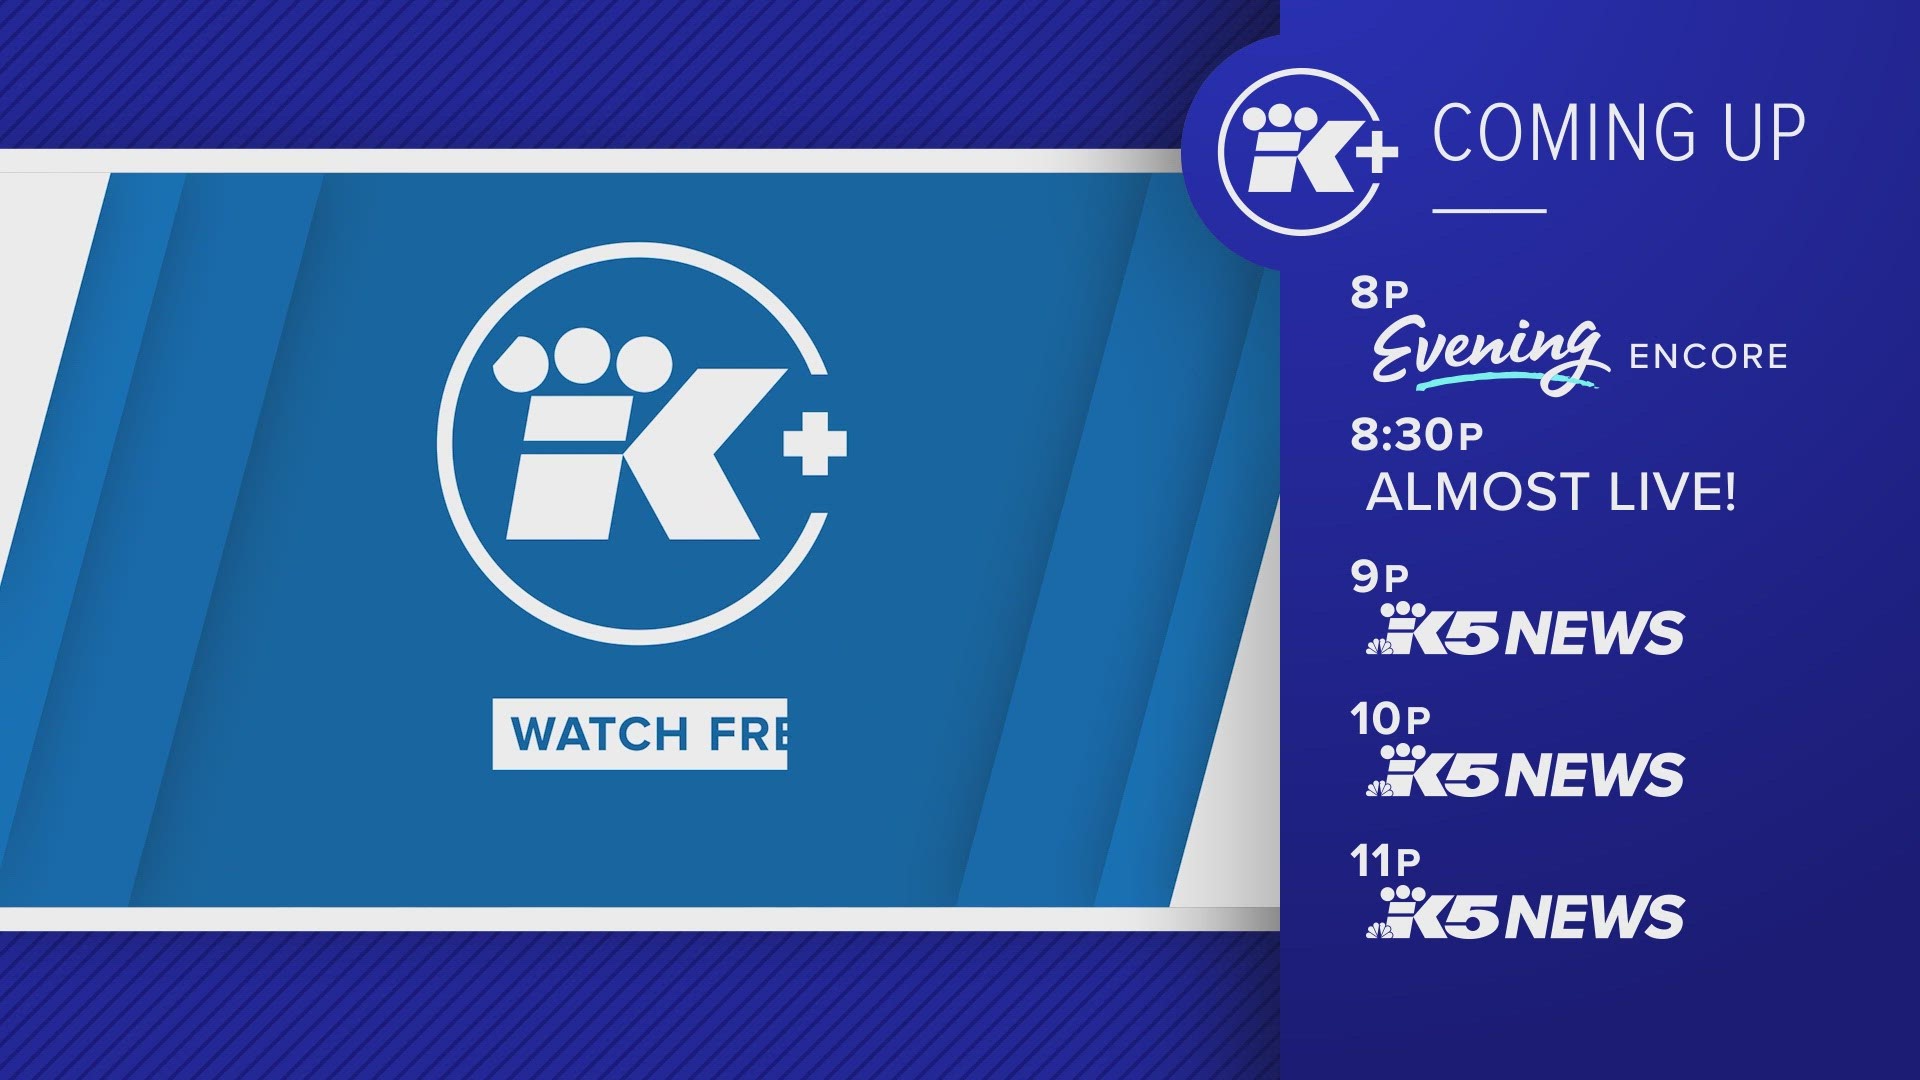 Here's what's coming up at 8 p.m. on KING 5+.